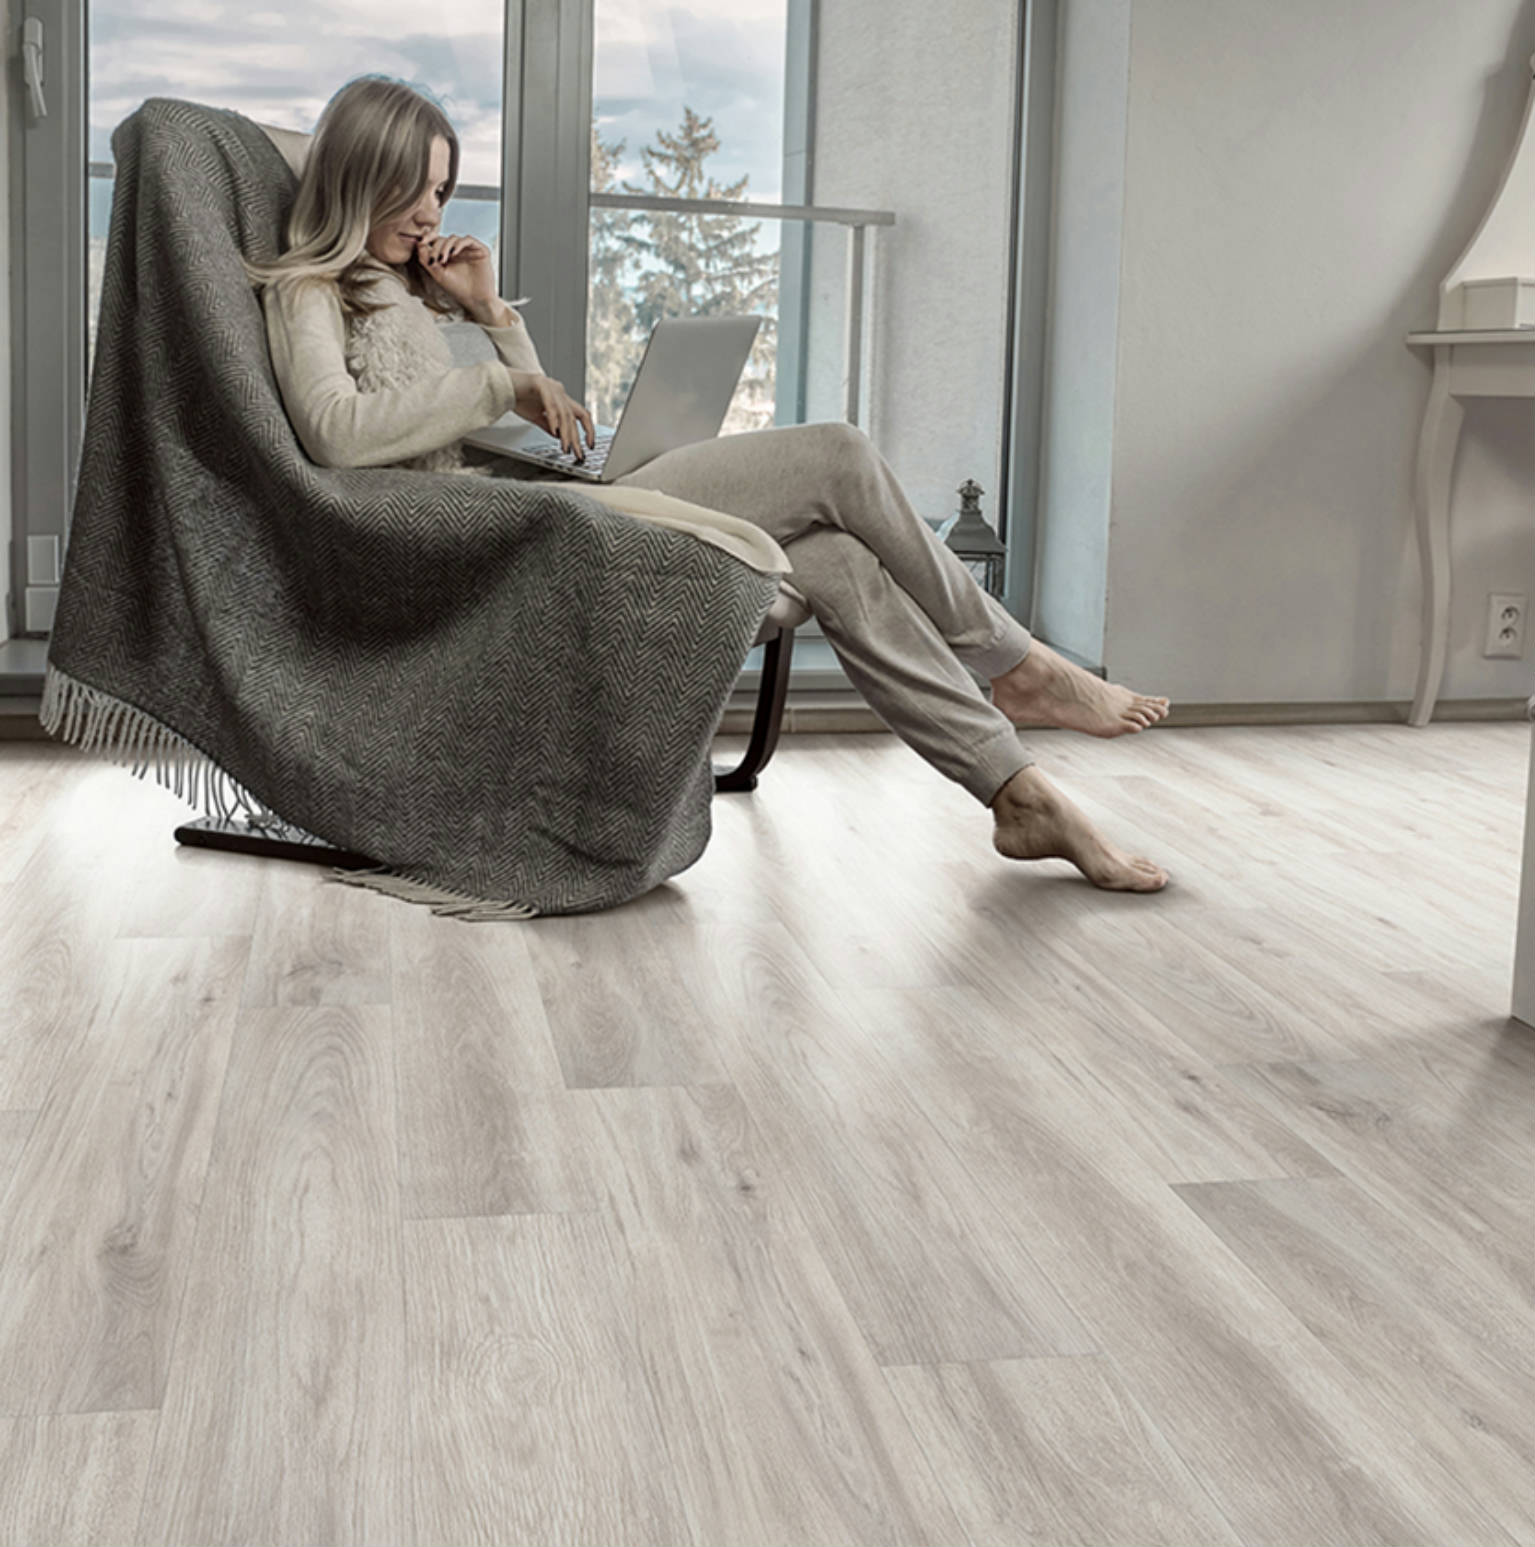 Timber Ridge USA Gold 12 5 | Qualis Ceramica | Luxury Tile and Vinyl at affordable prices